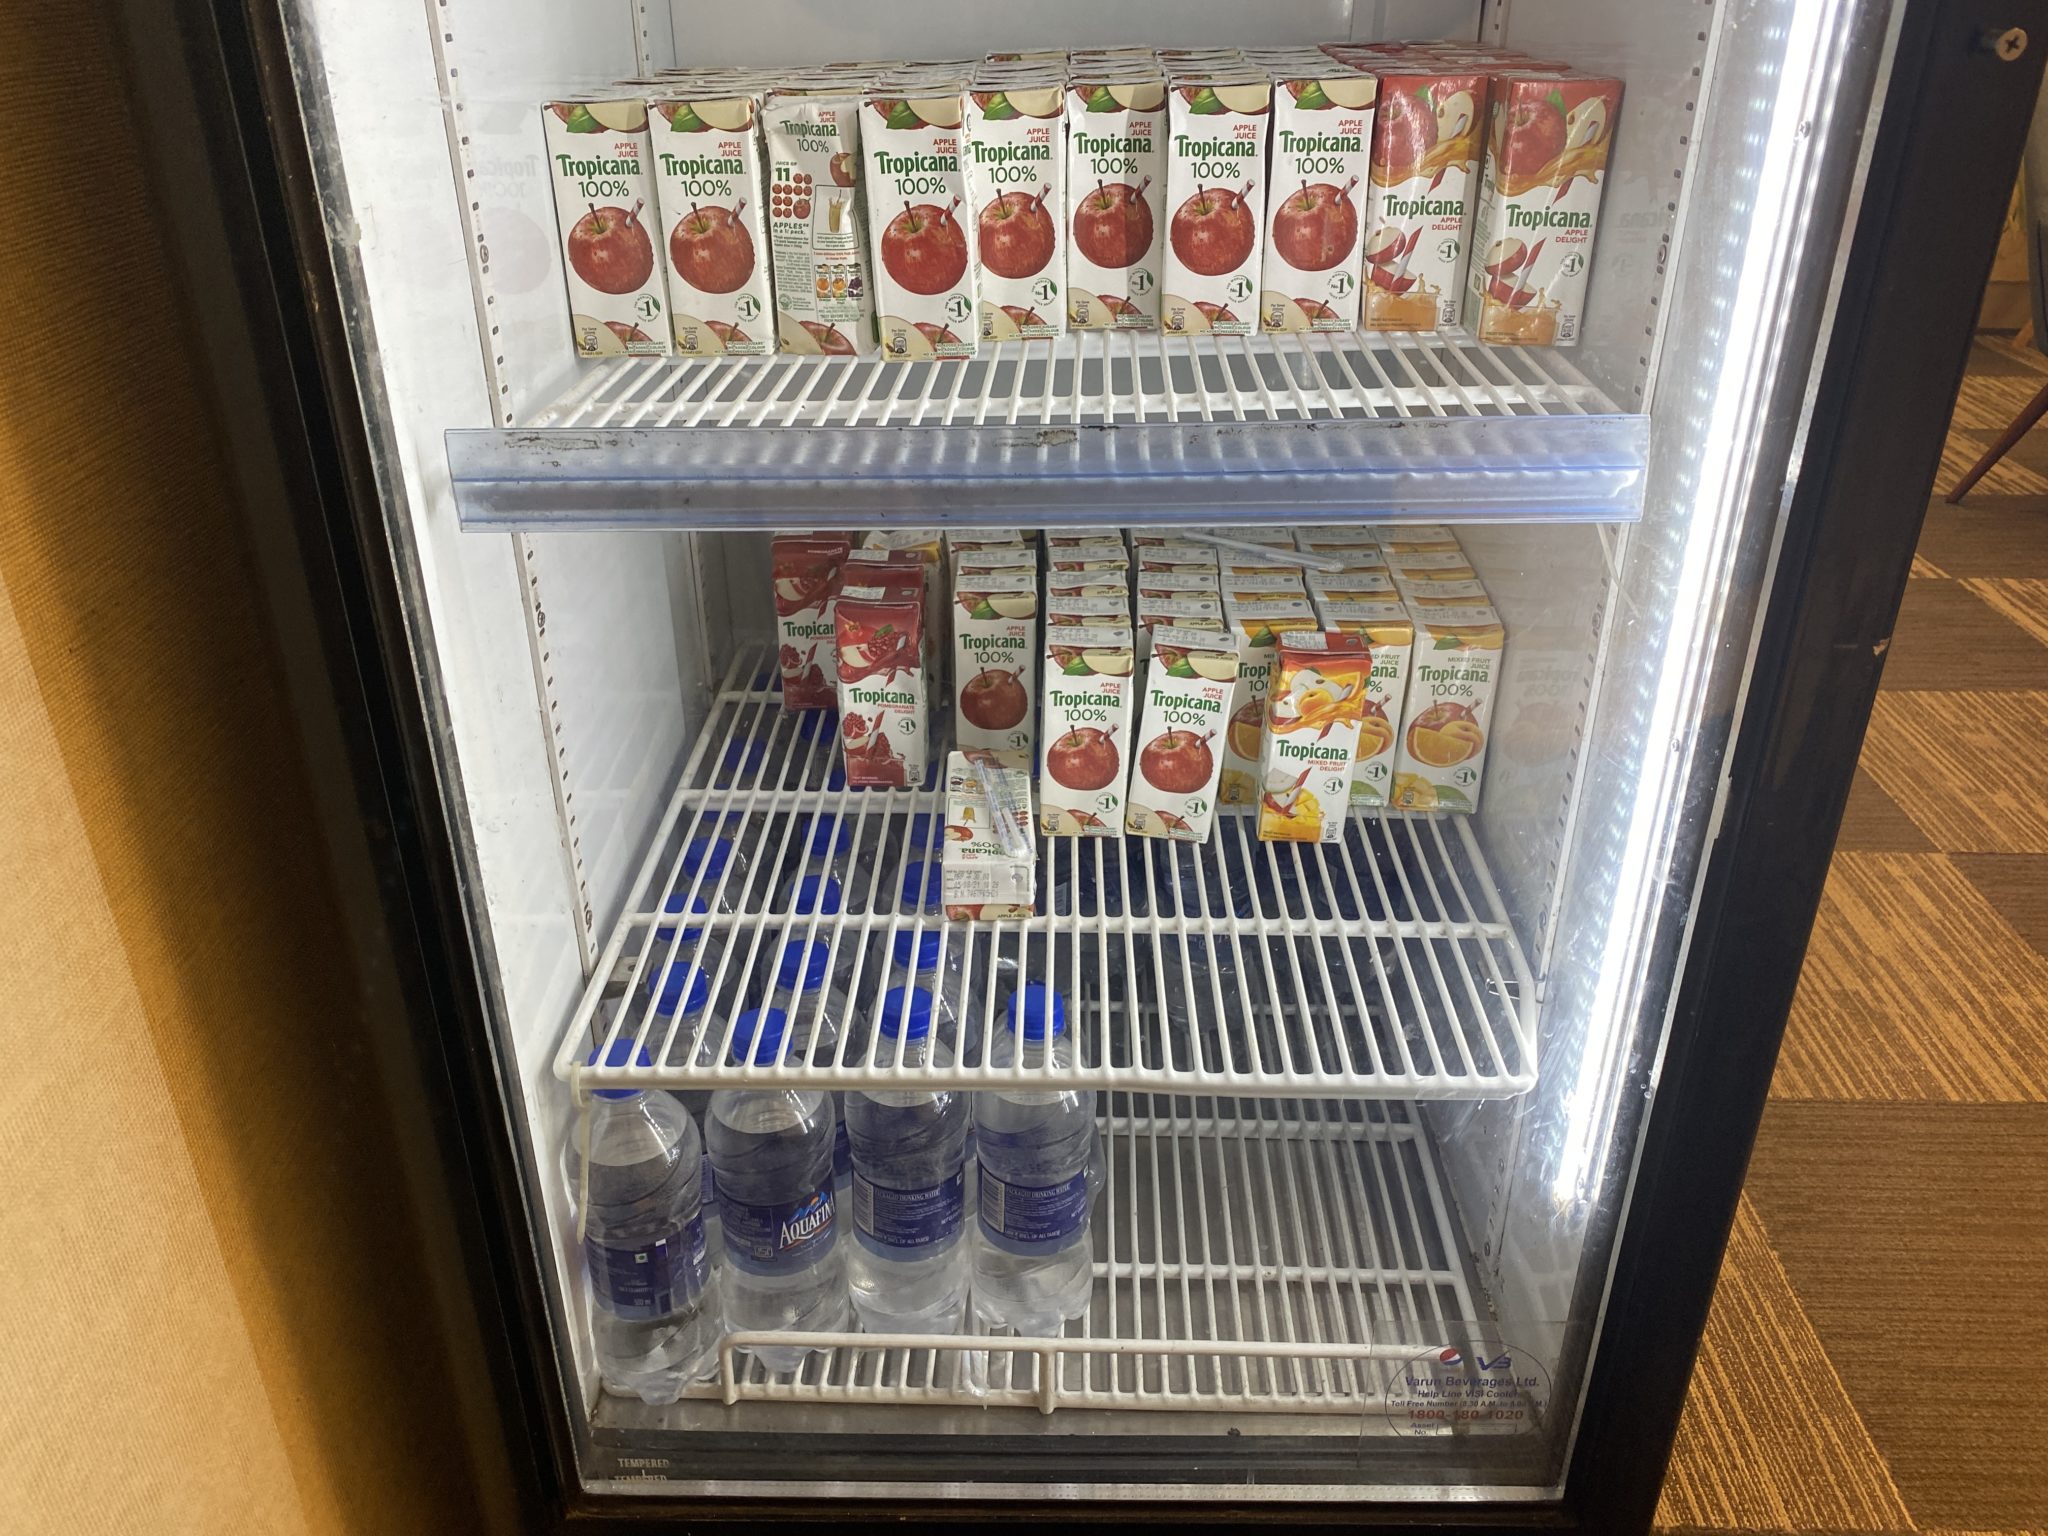 a refrigerator full of juices and water